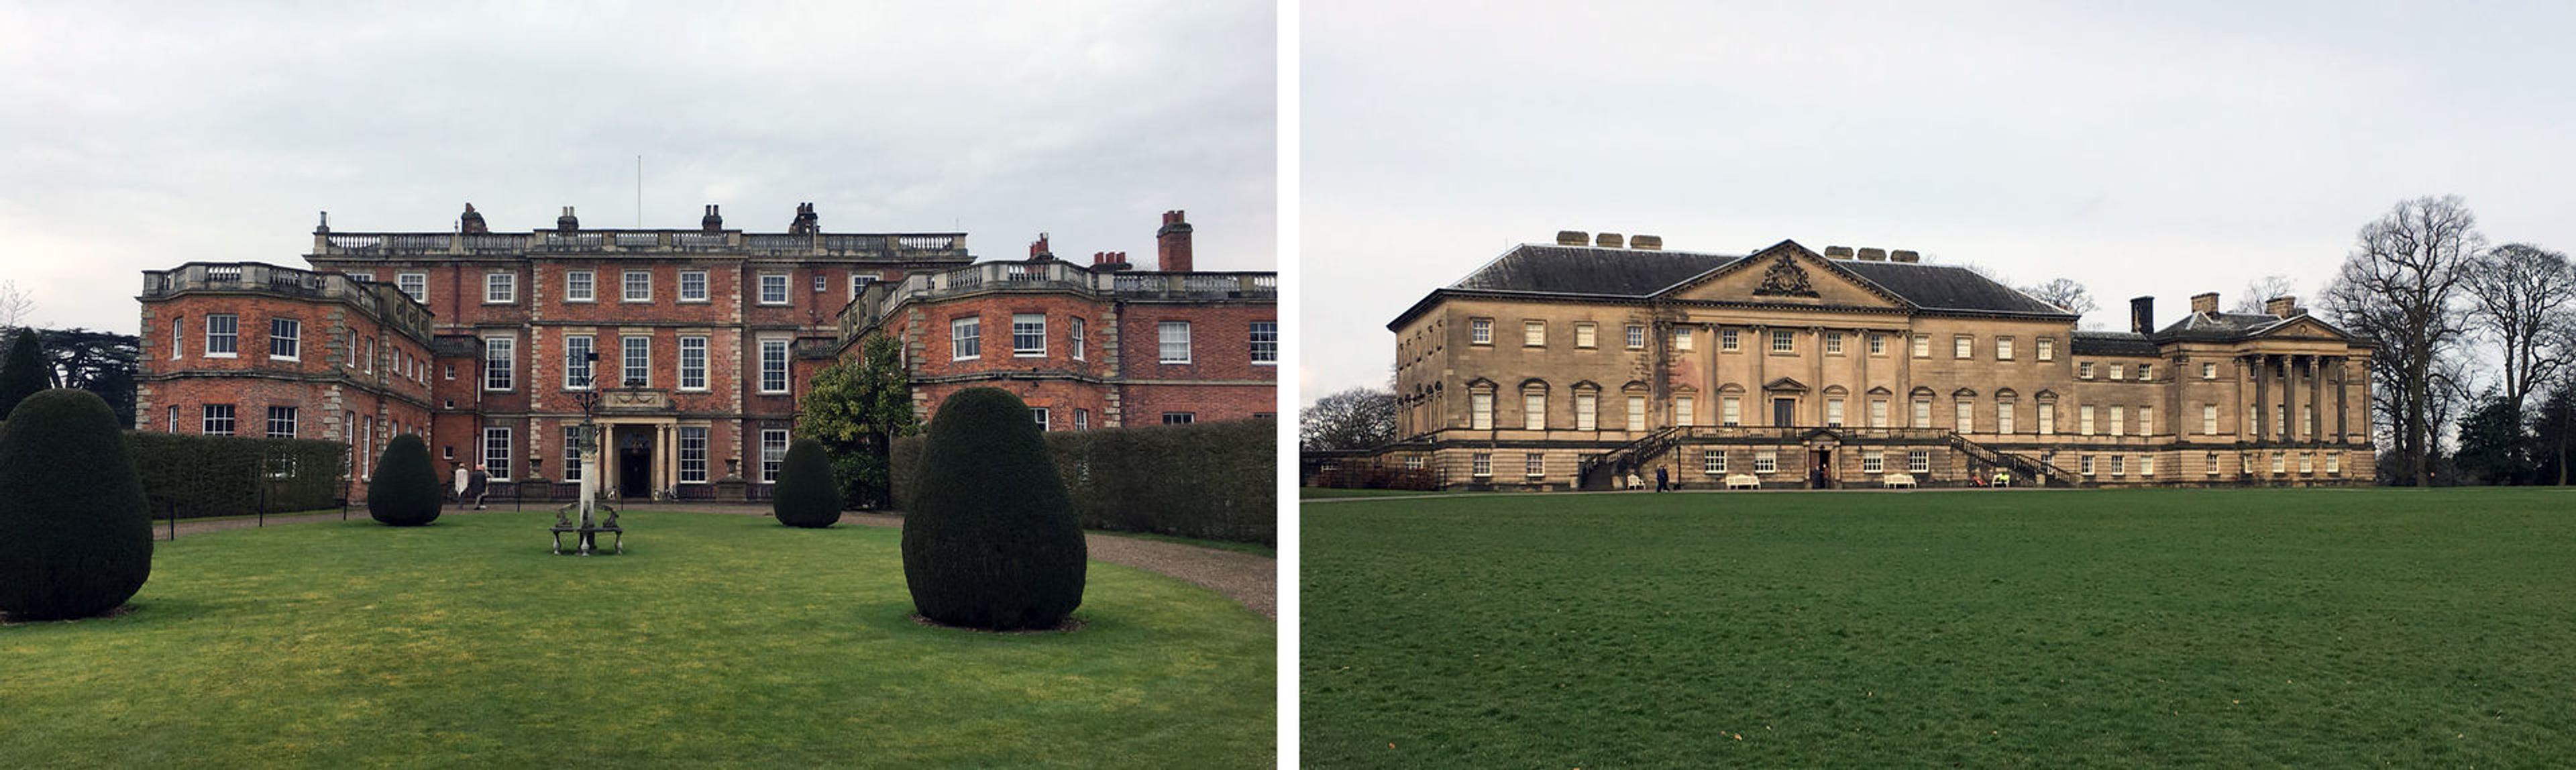 Photos of two manor houses in the Yorkshire area of England